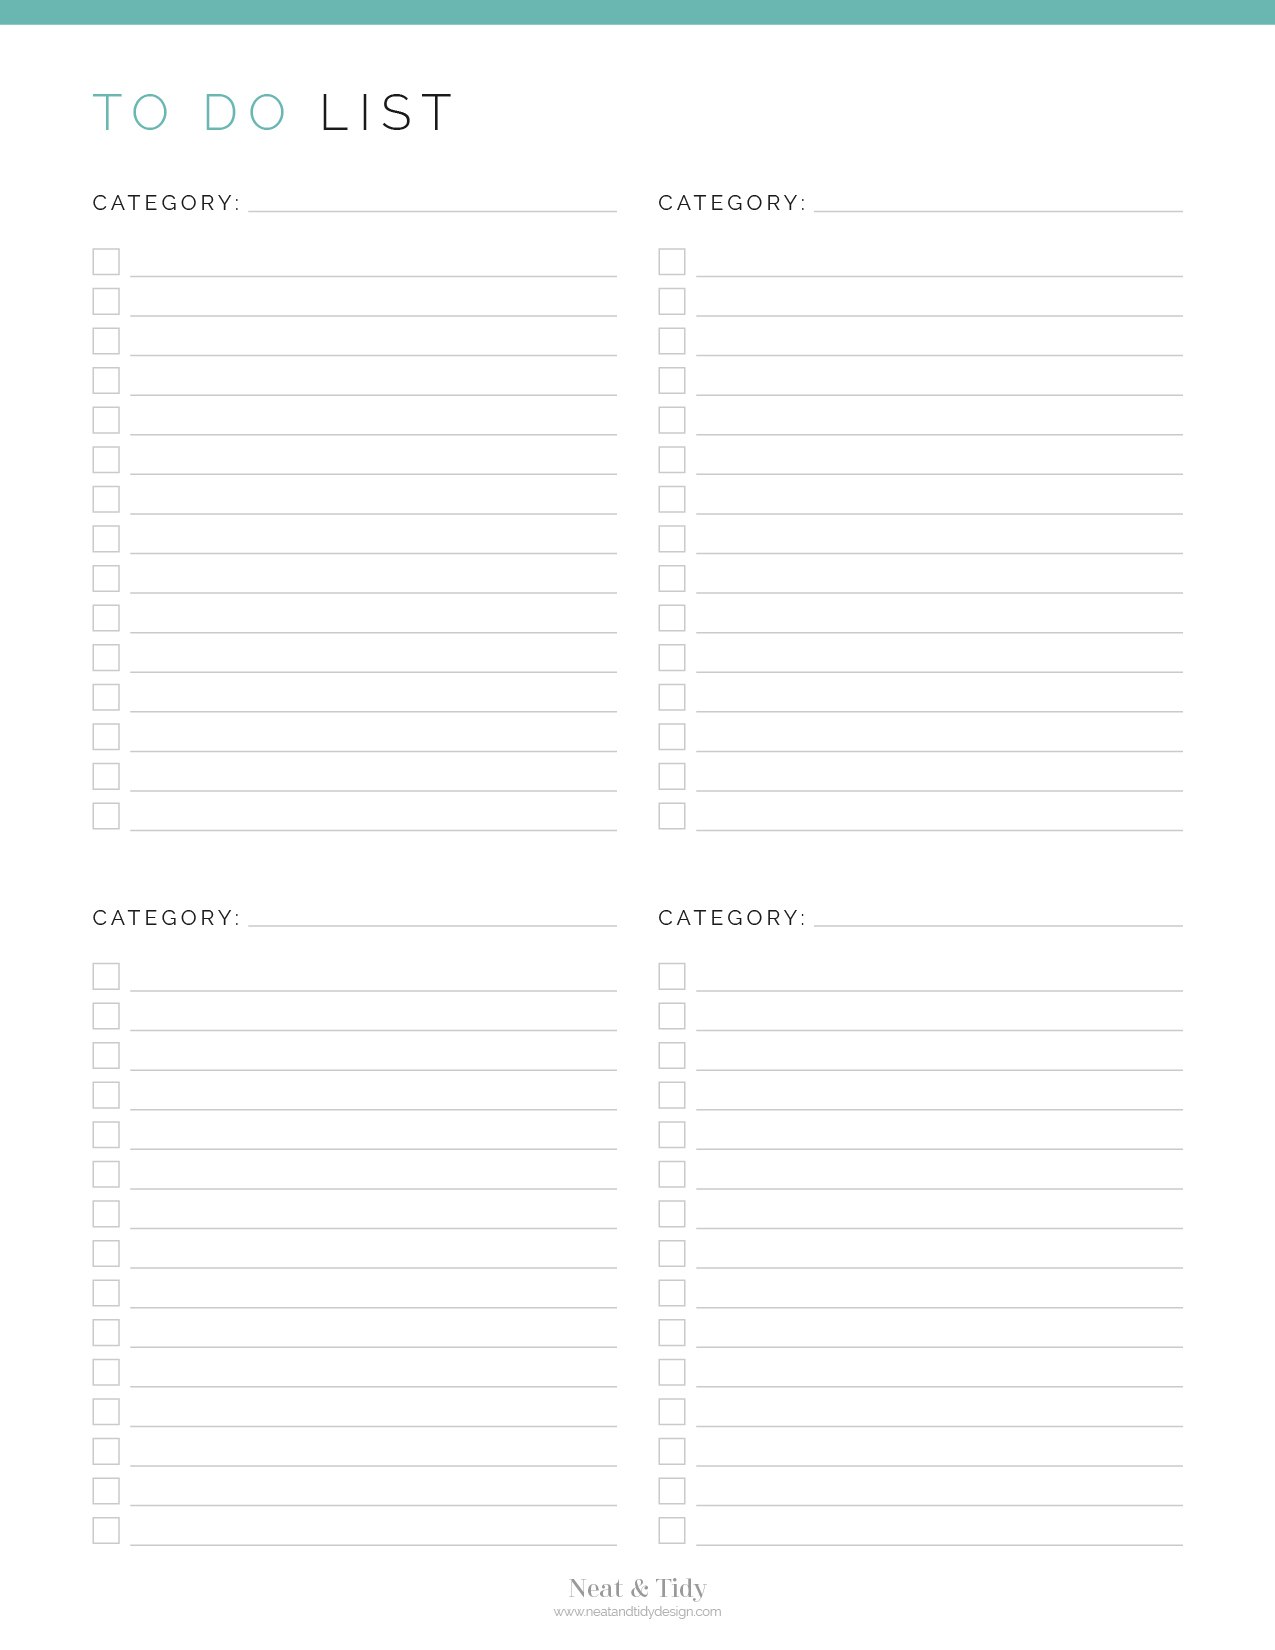 To Do List With Categories Neat And Tidy Design